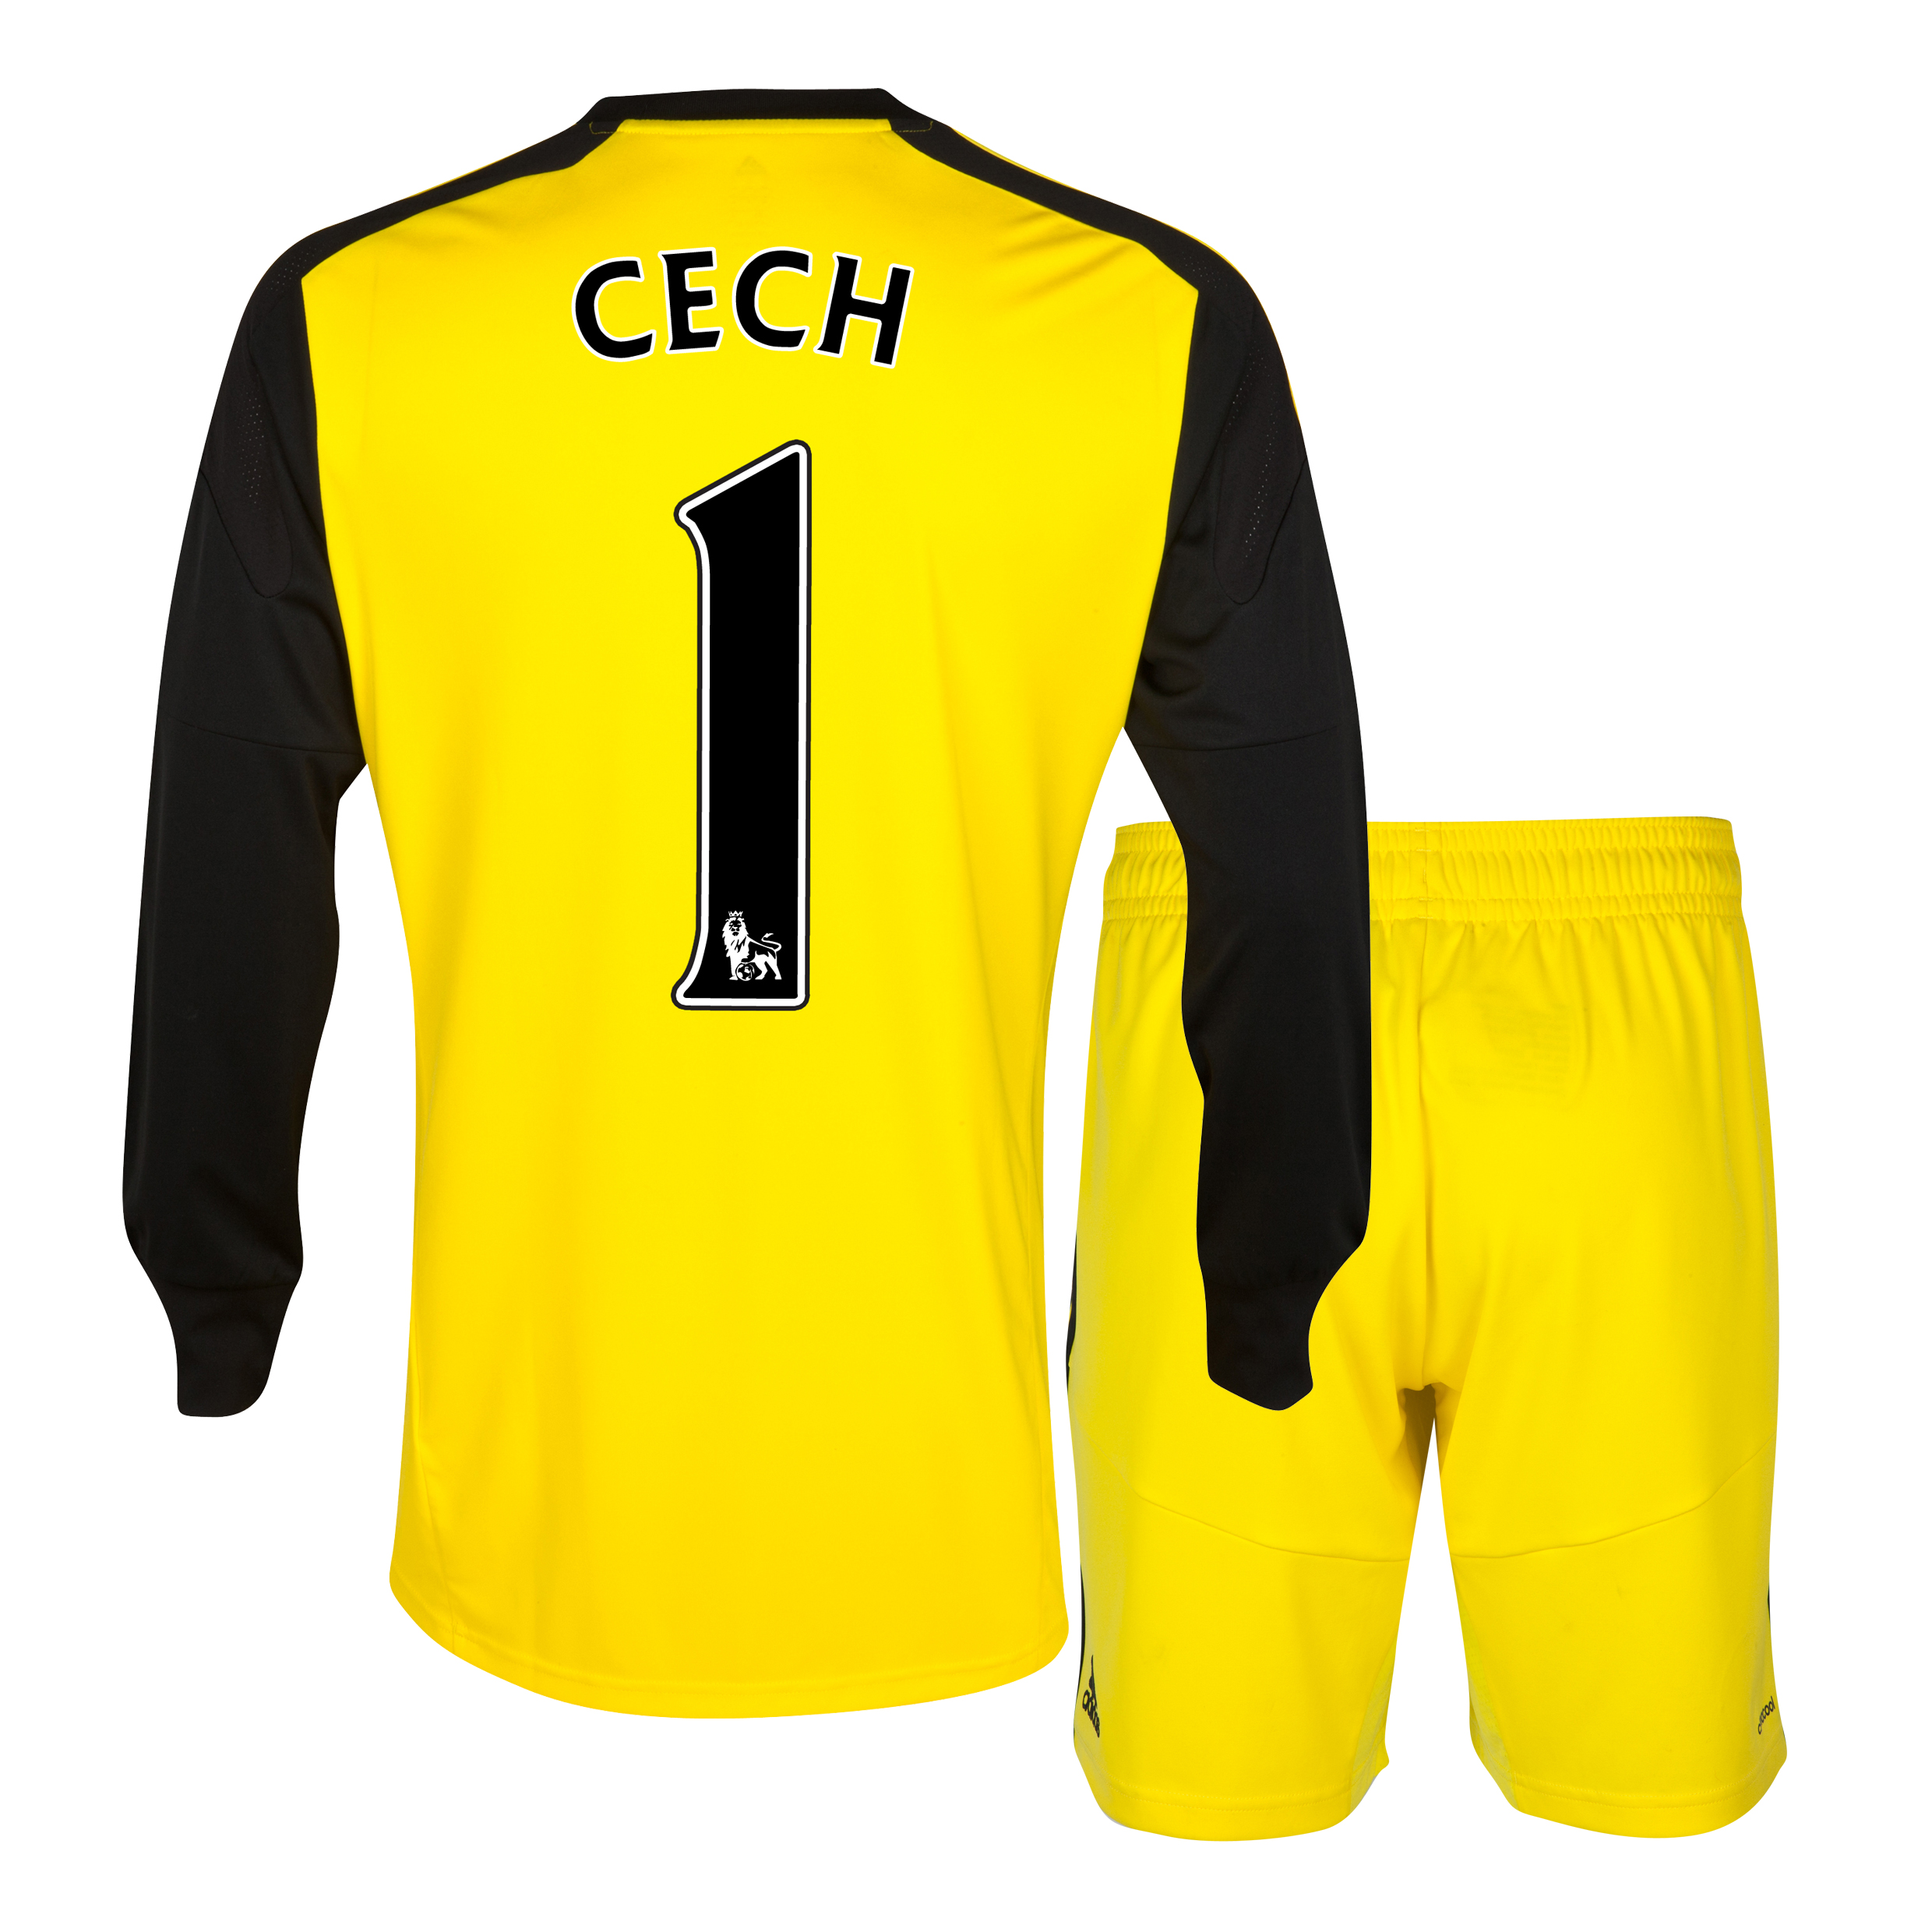 Chelsea Home Goalkeeper Mini Kit 2013/14 with Cech 1 printing